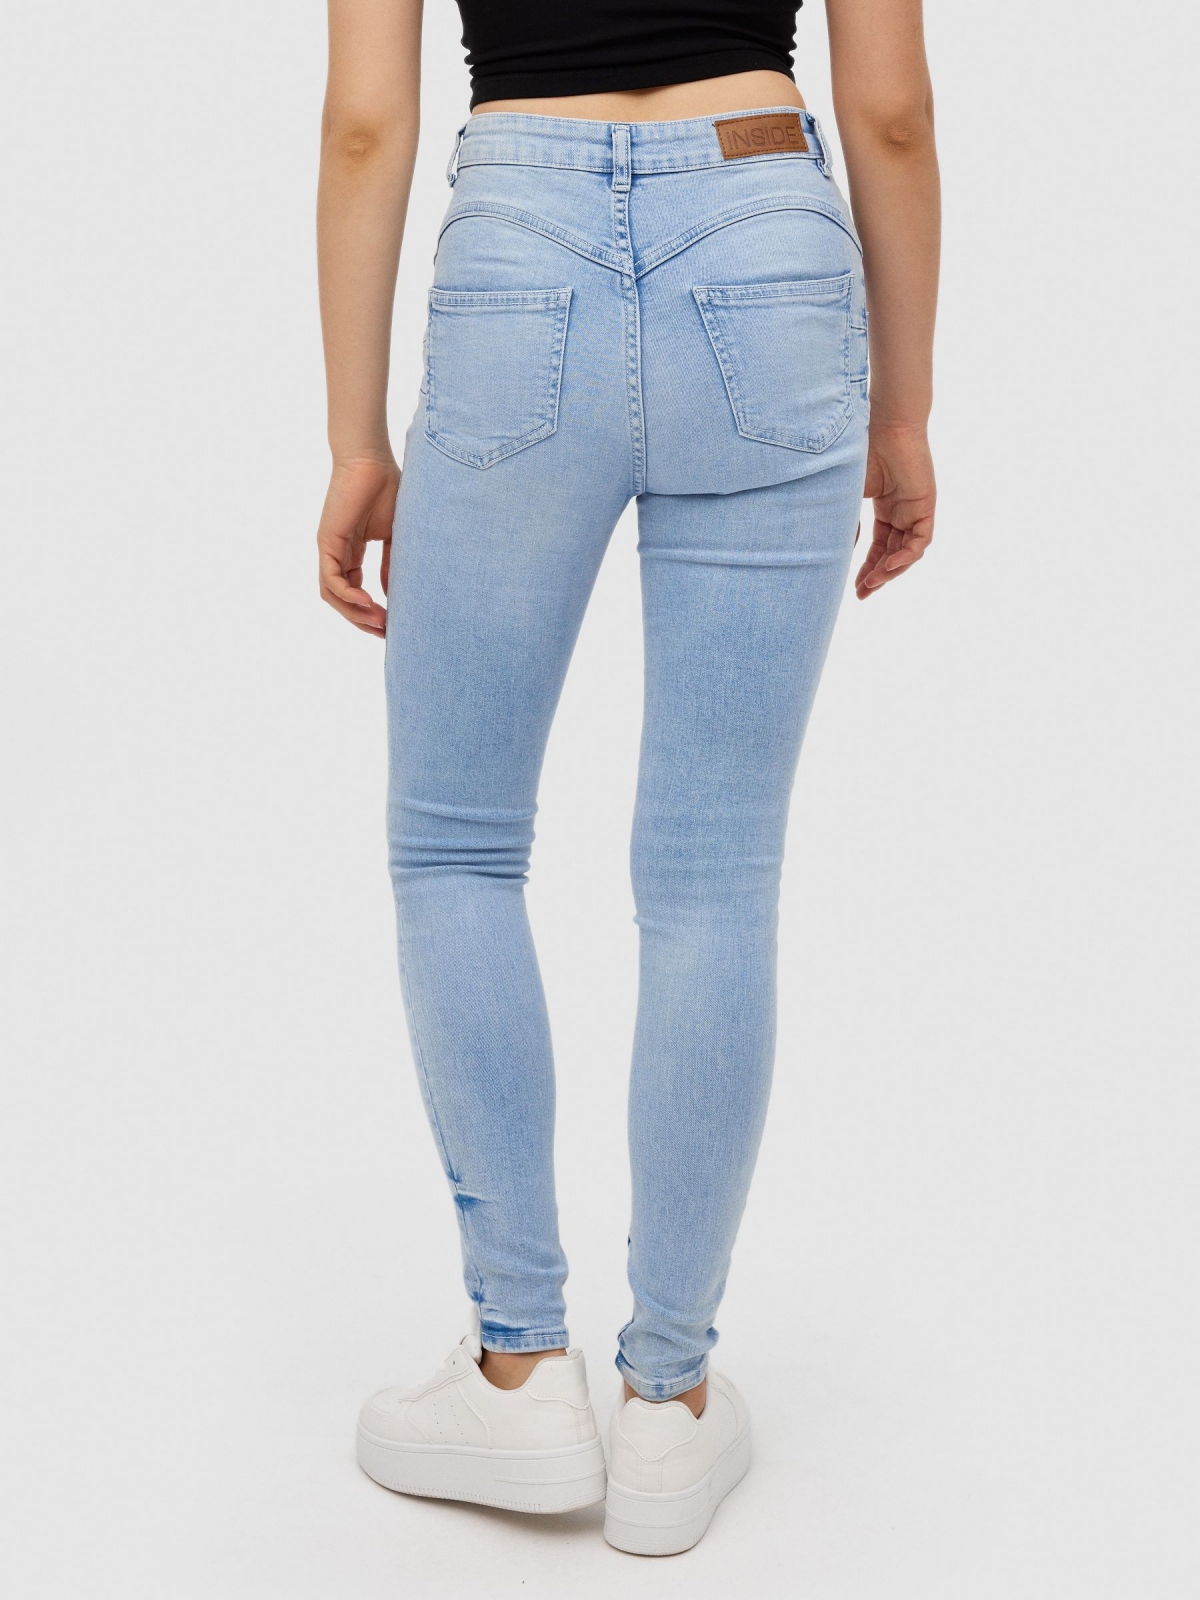 Denim skinny jeans high rise blue middle back view